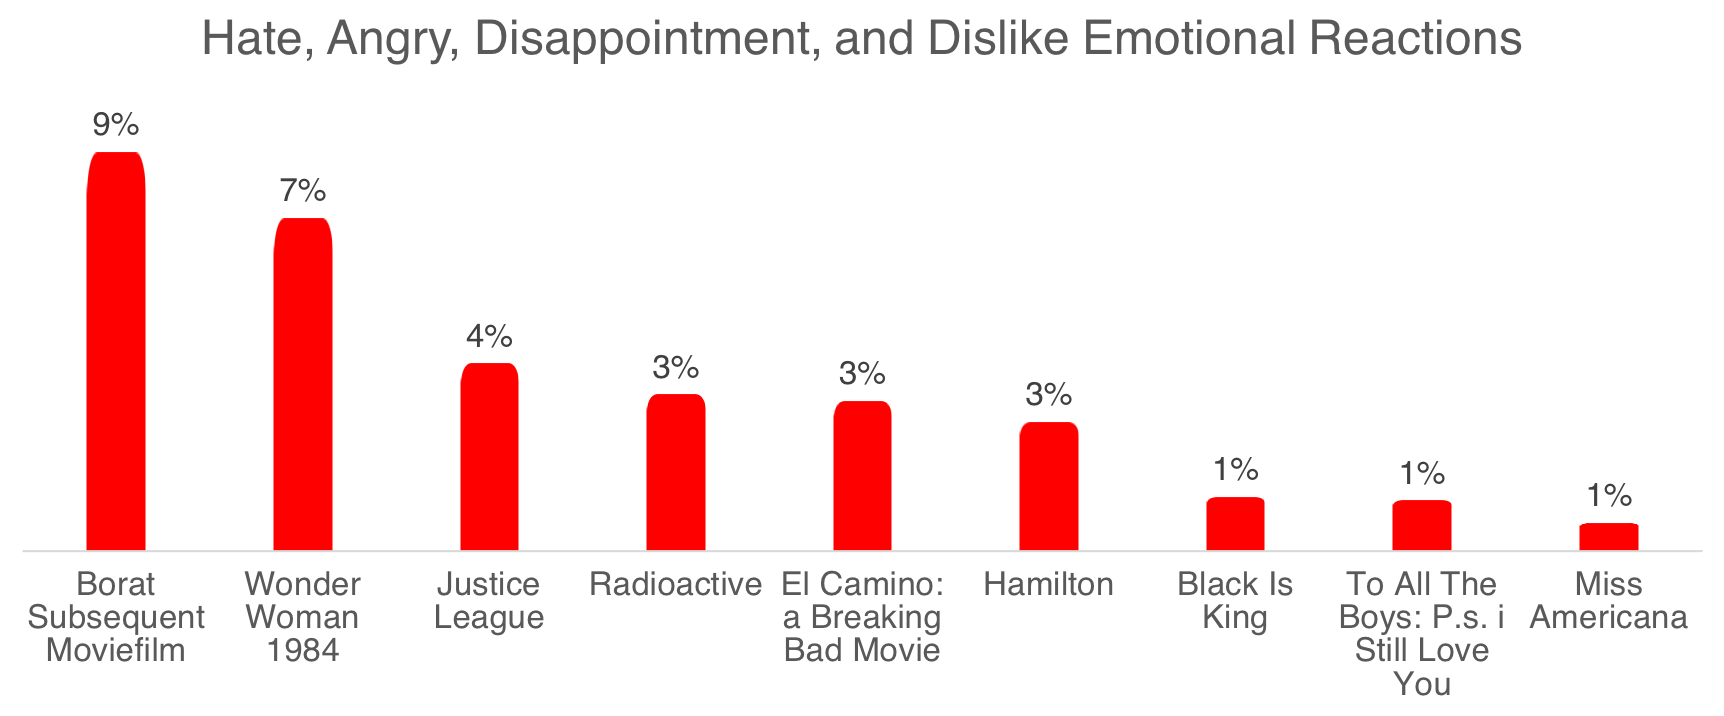 Source: Canvs Explore, OTT movies with the highest rate of hate, angry, disappointment, and dislike Emotional Reactions in 2020